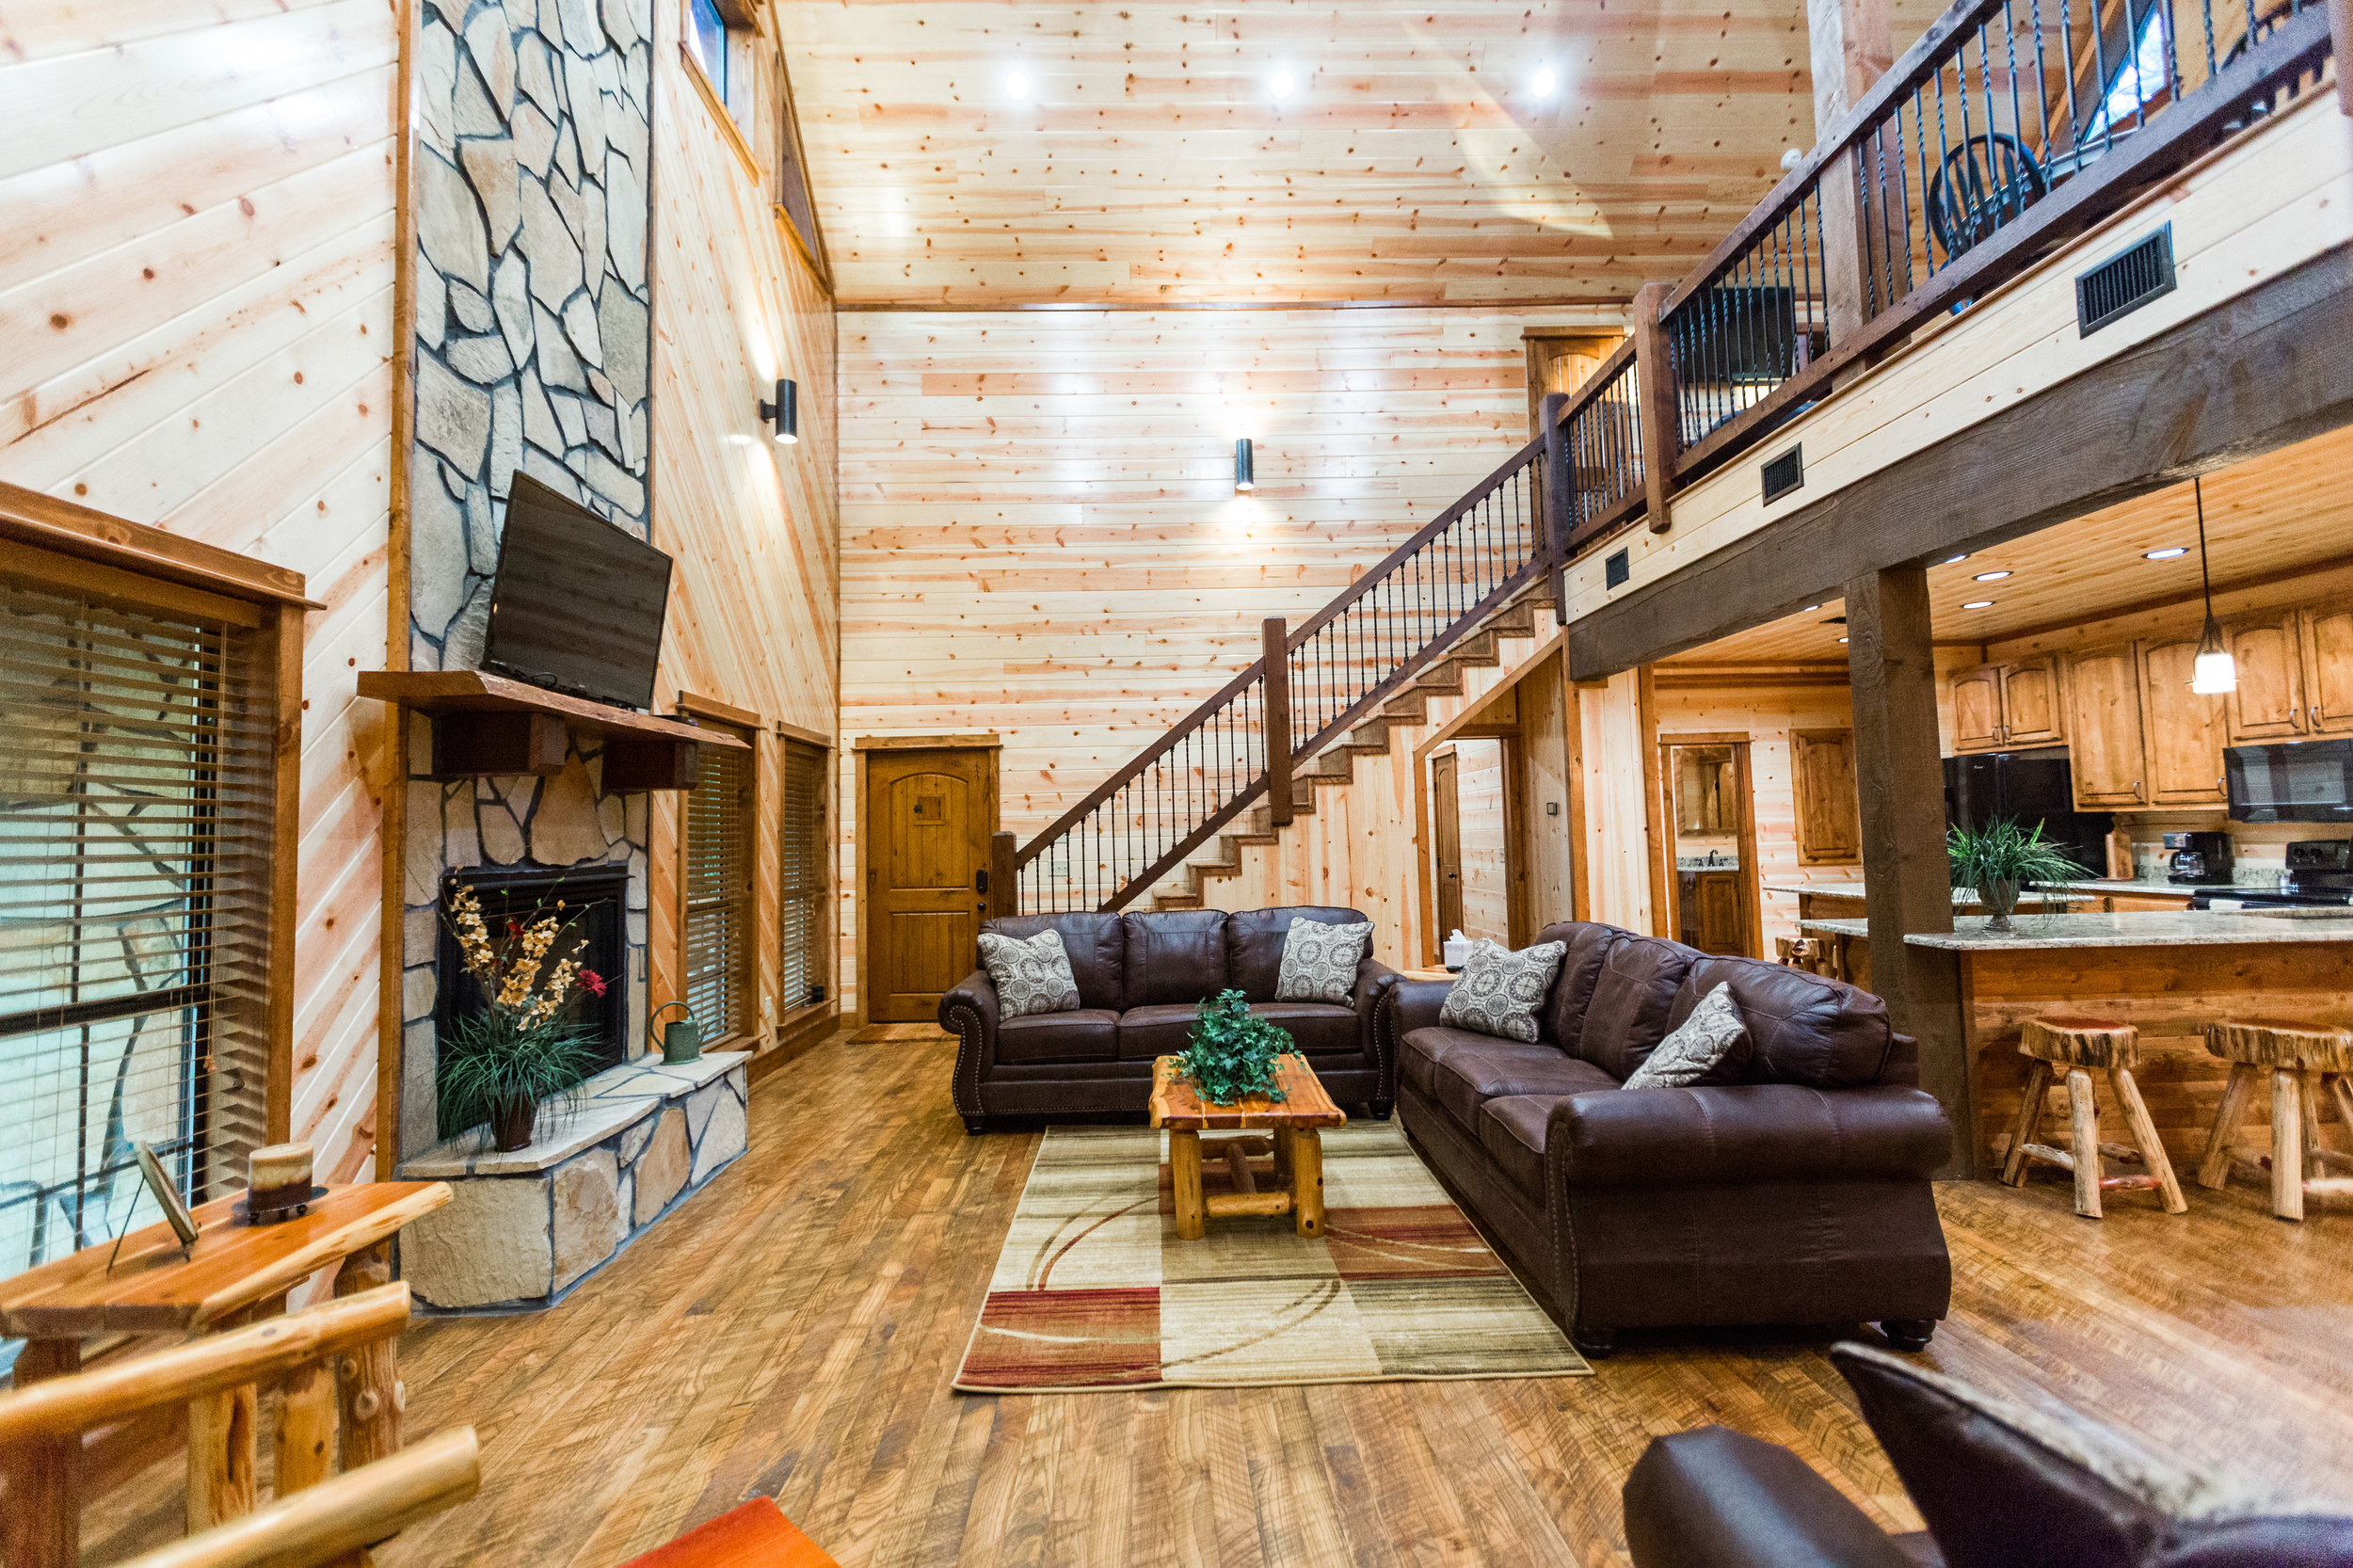 oklahoma luxury cabin rentals beavers bend vacation getaway hochatown mount fork river stephens gap lake ouachita mountains fireplace leather couches